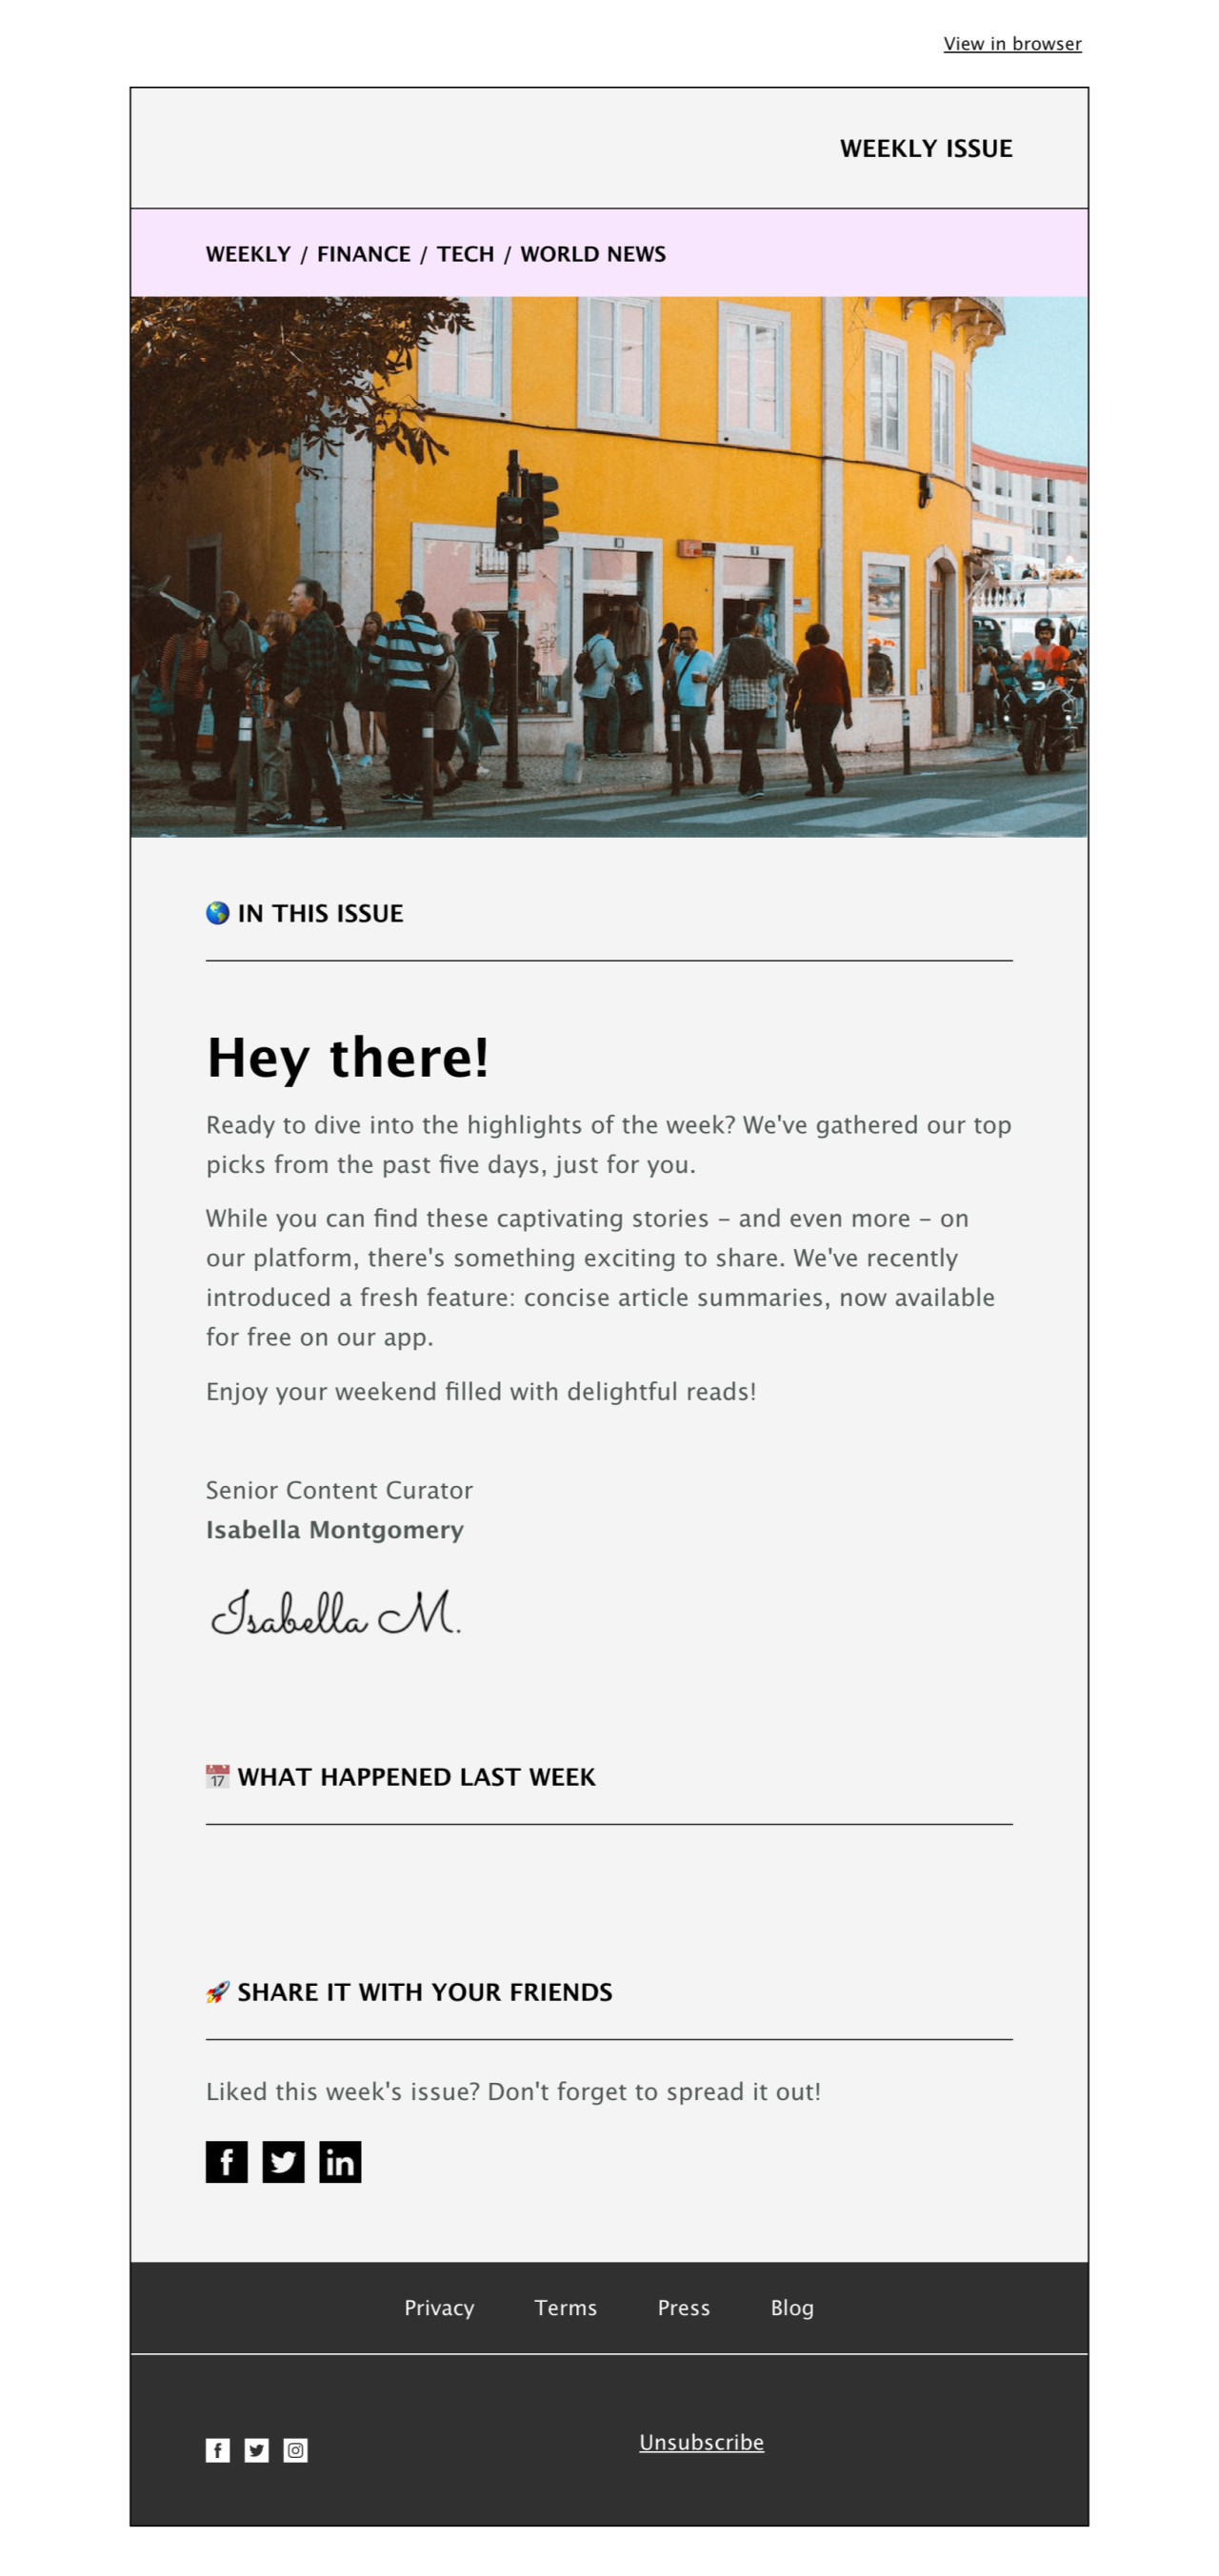 Weekly issue template - Made by MailerLite